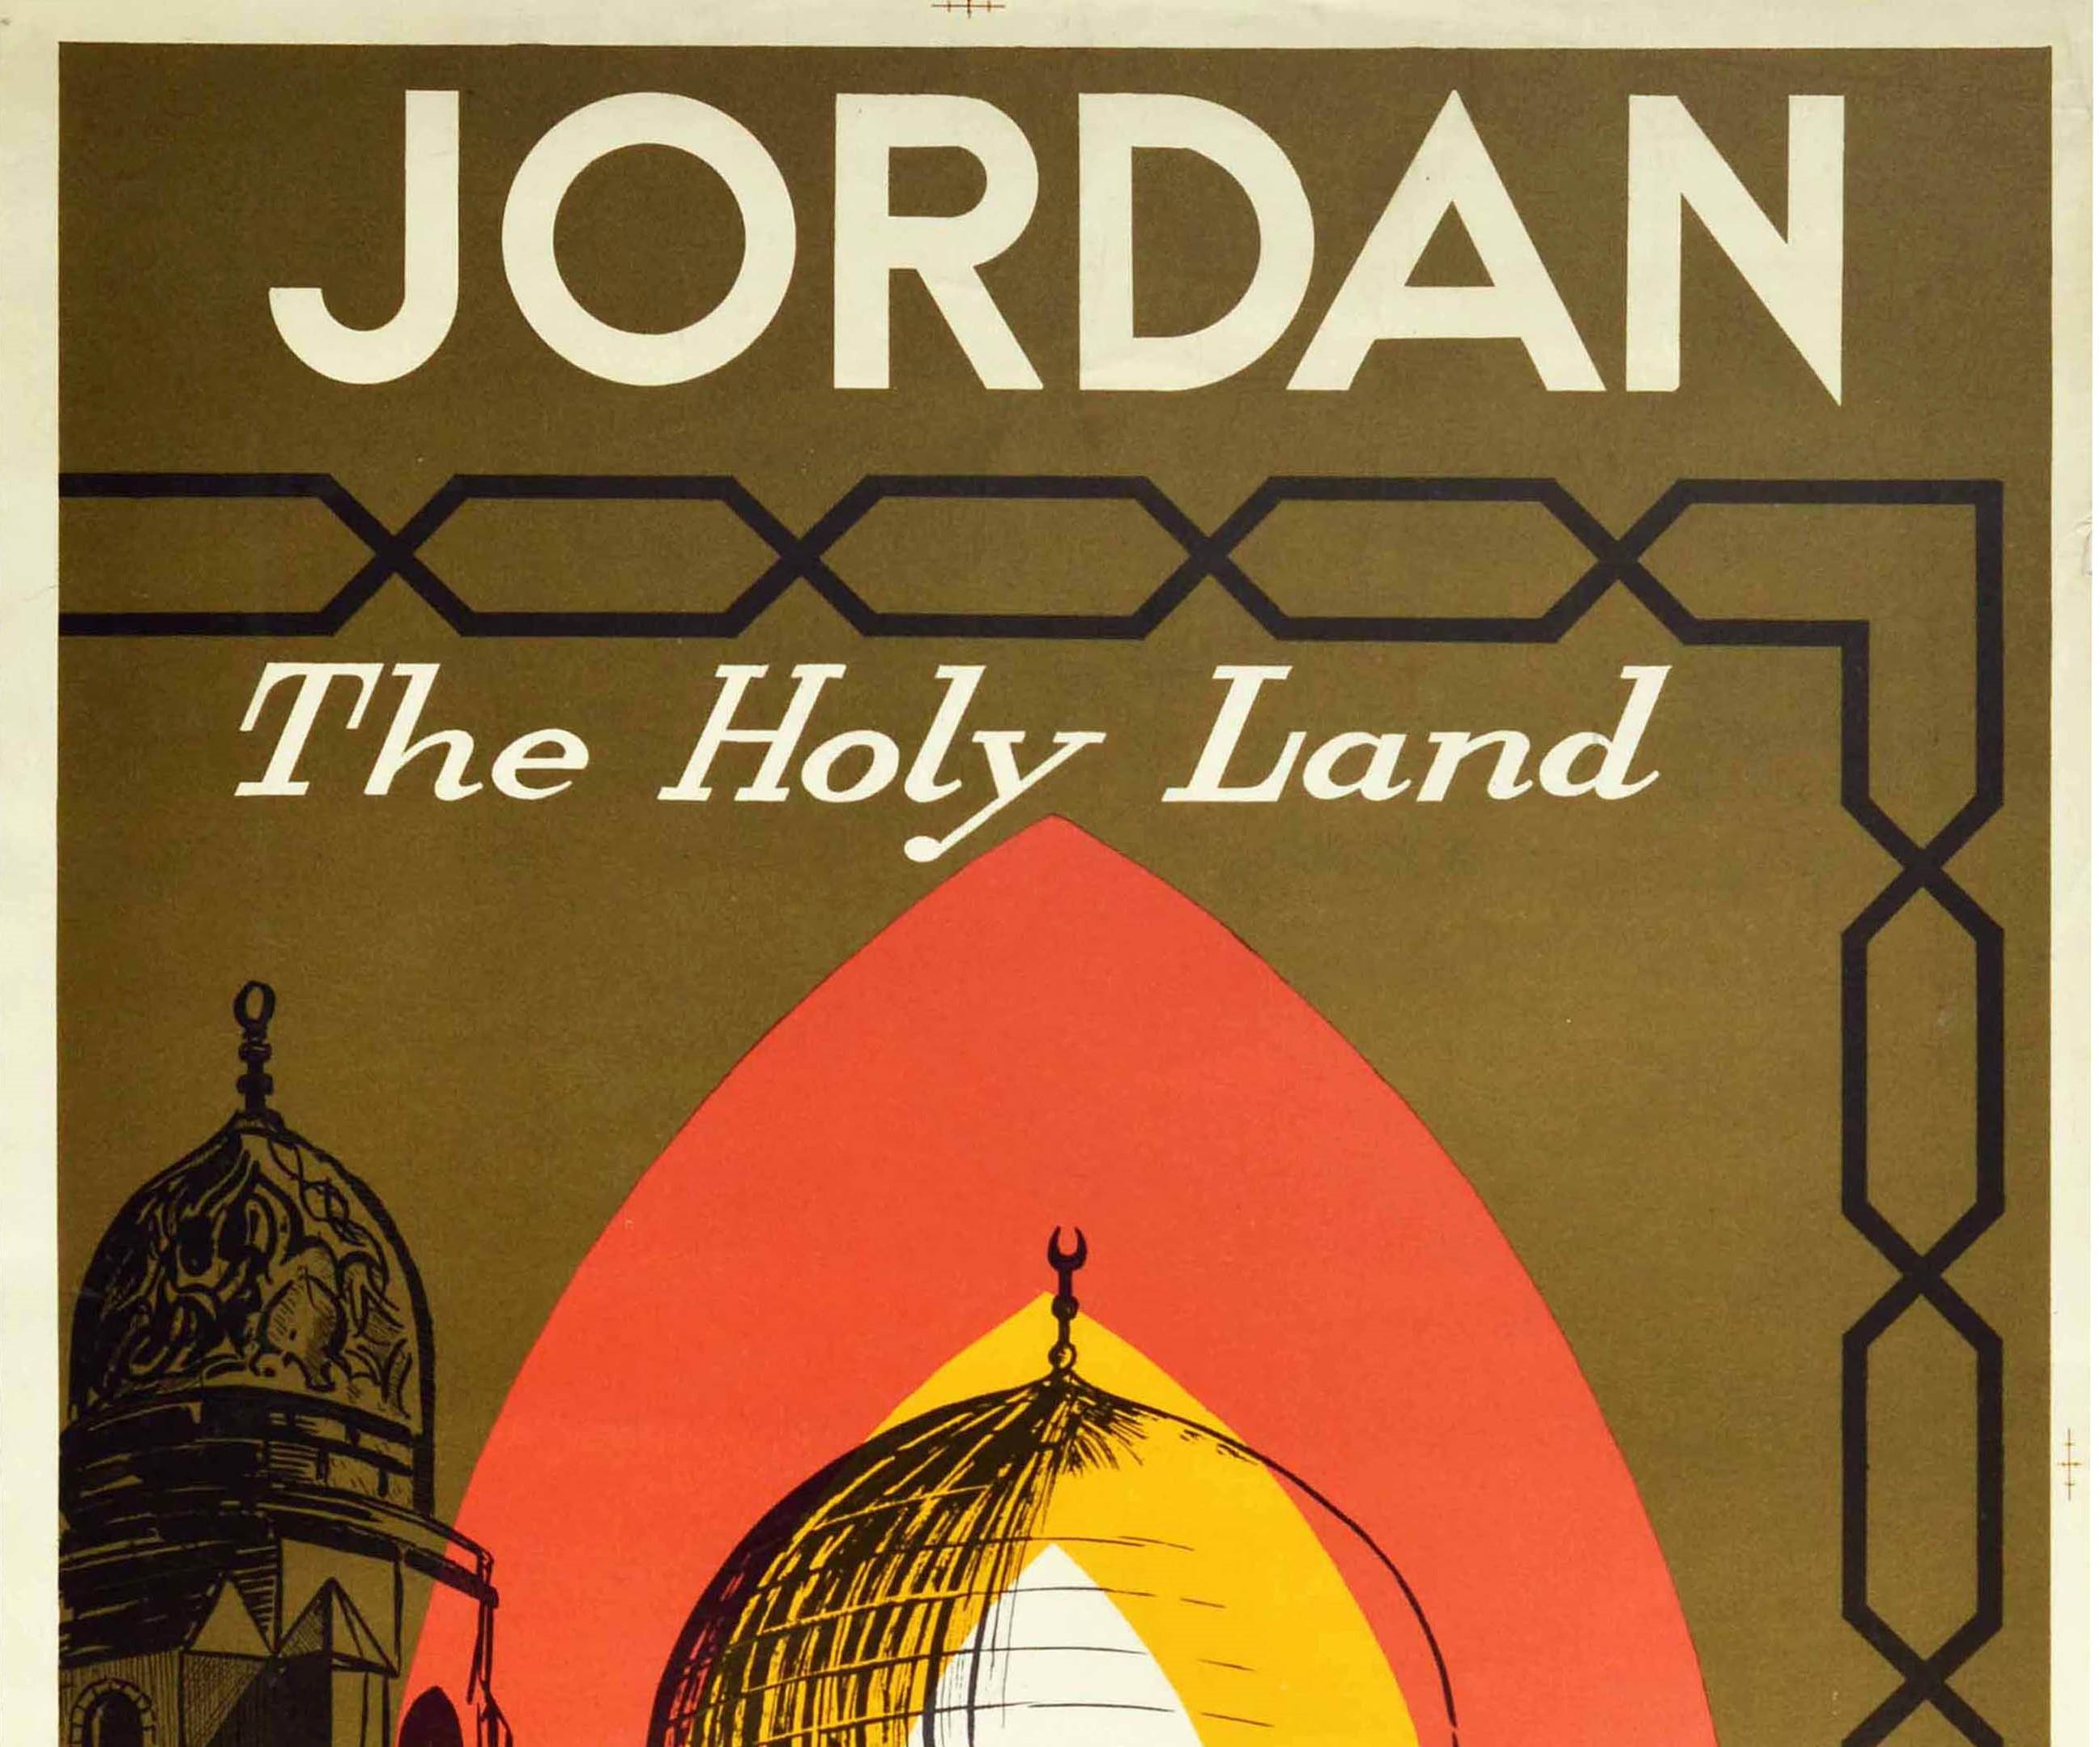 Original vintage travel poster for Jordan The Holy Land issued by the Jordan Tourism Authority featuring an illustration of one of the three holiest sites in Islam - the historic Al-Aqsa Mosque / the Farthest Mosque (established in 705) - located in